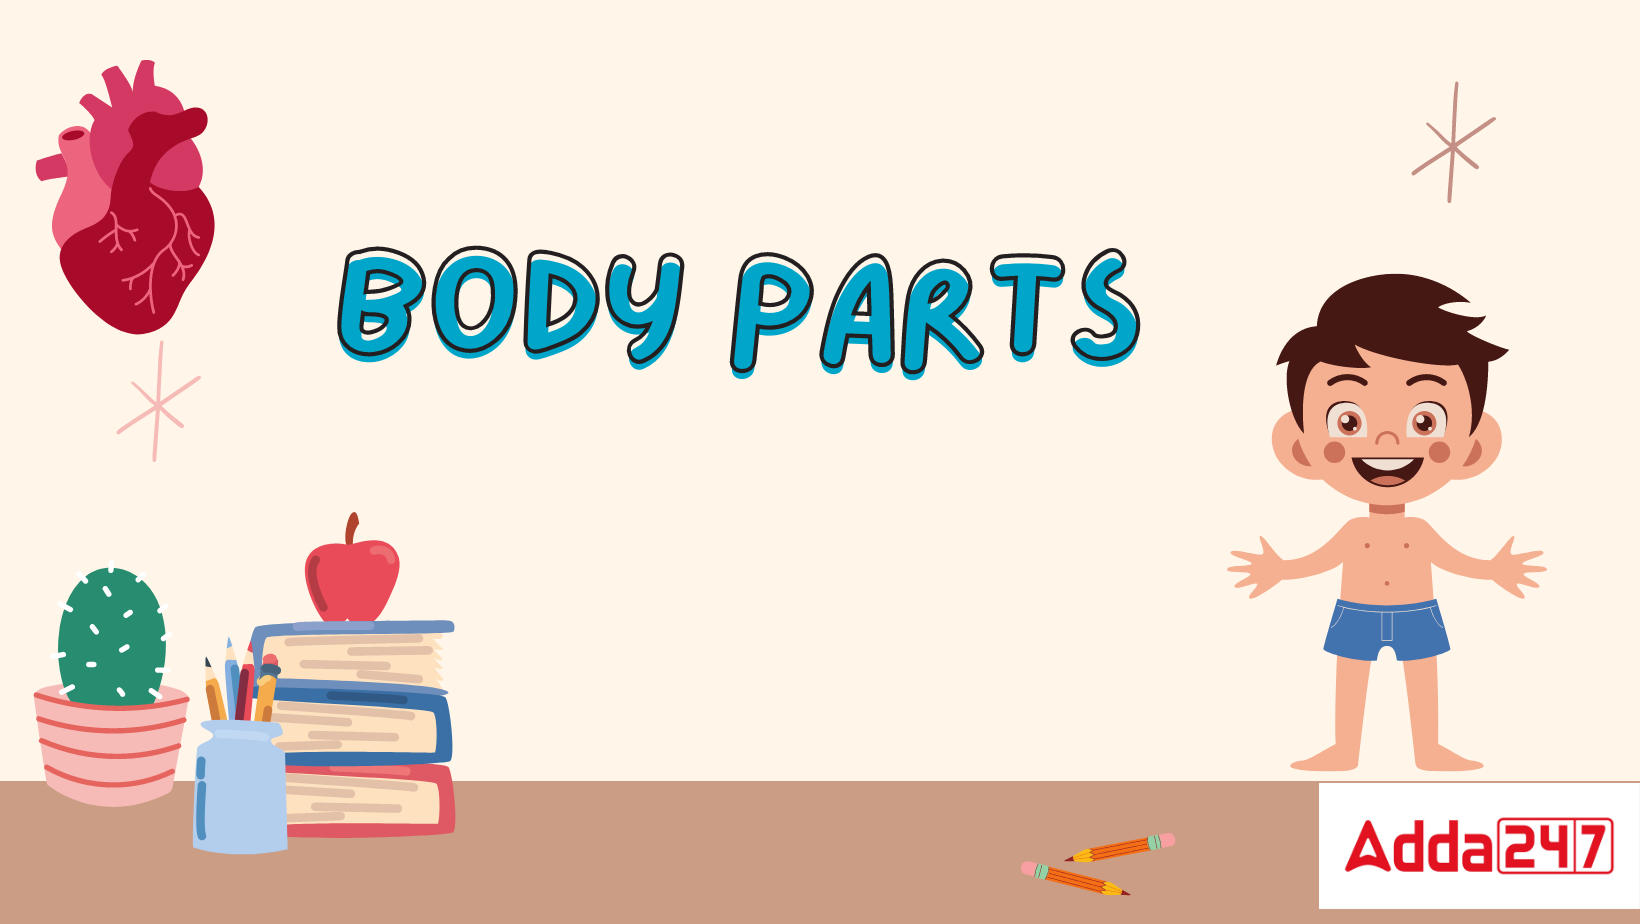 Body Parts Name With Pictures in English & Hindi PDF_30.1